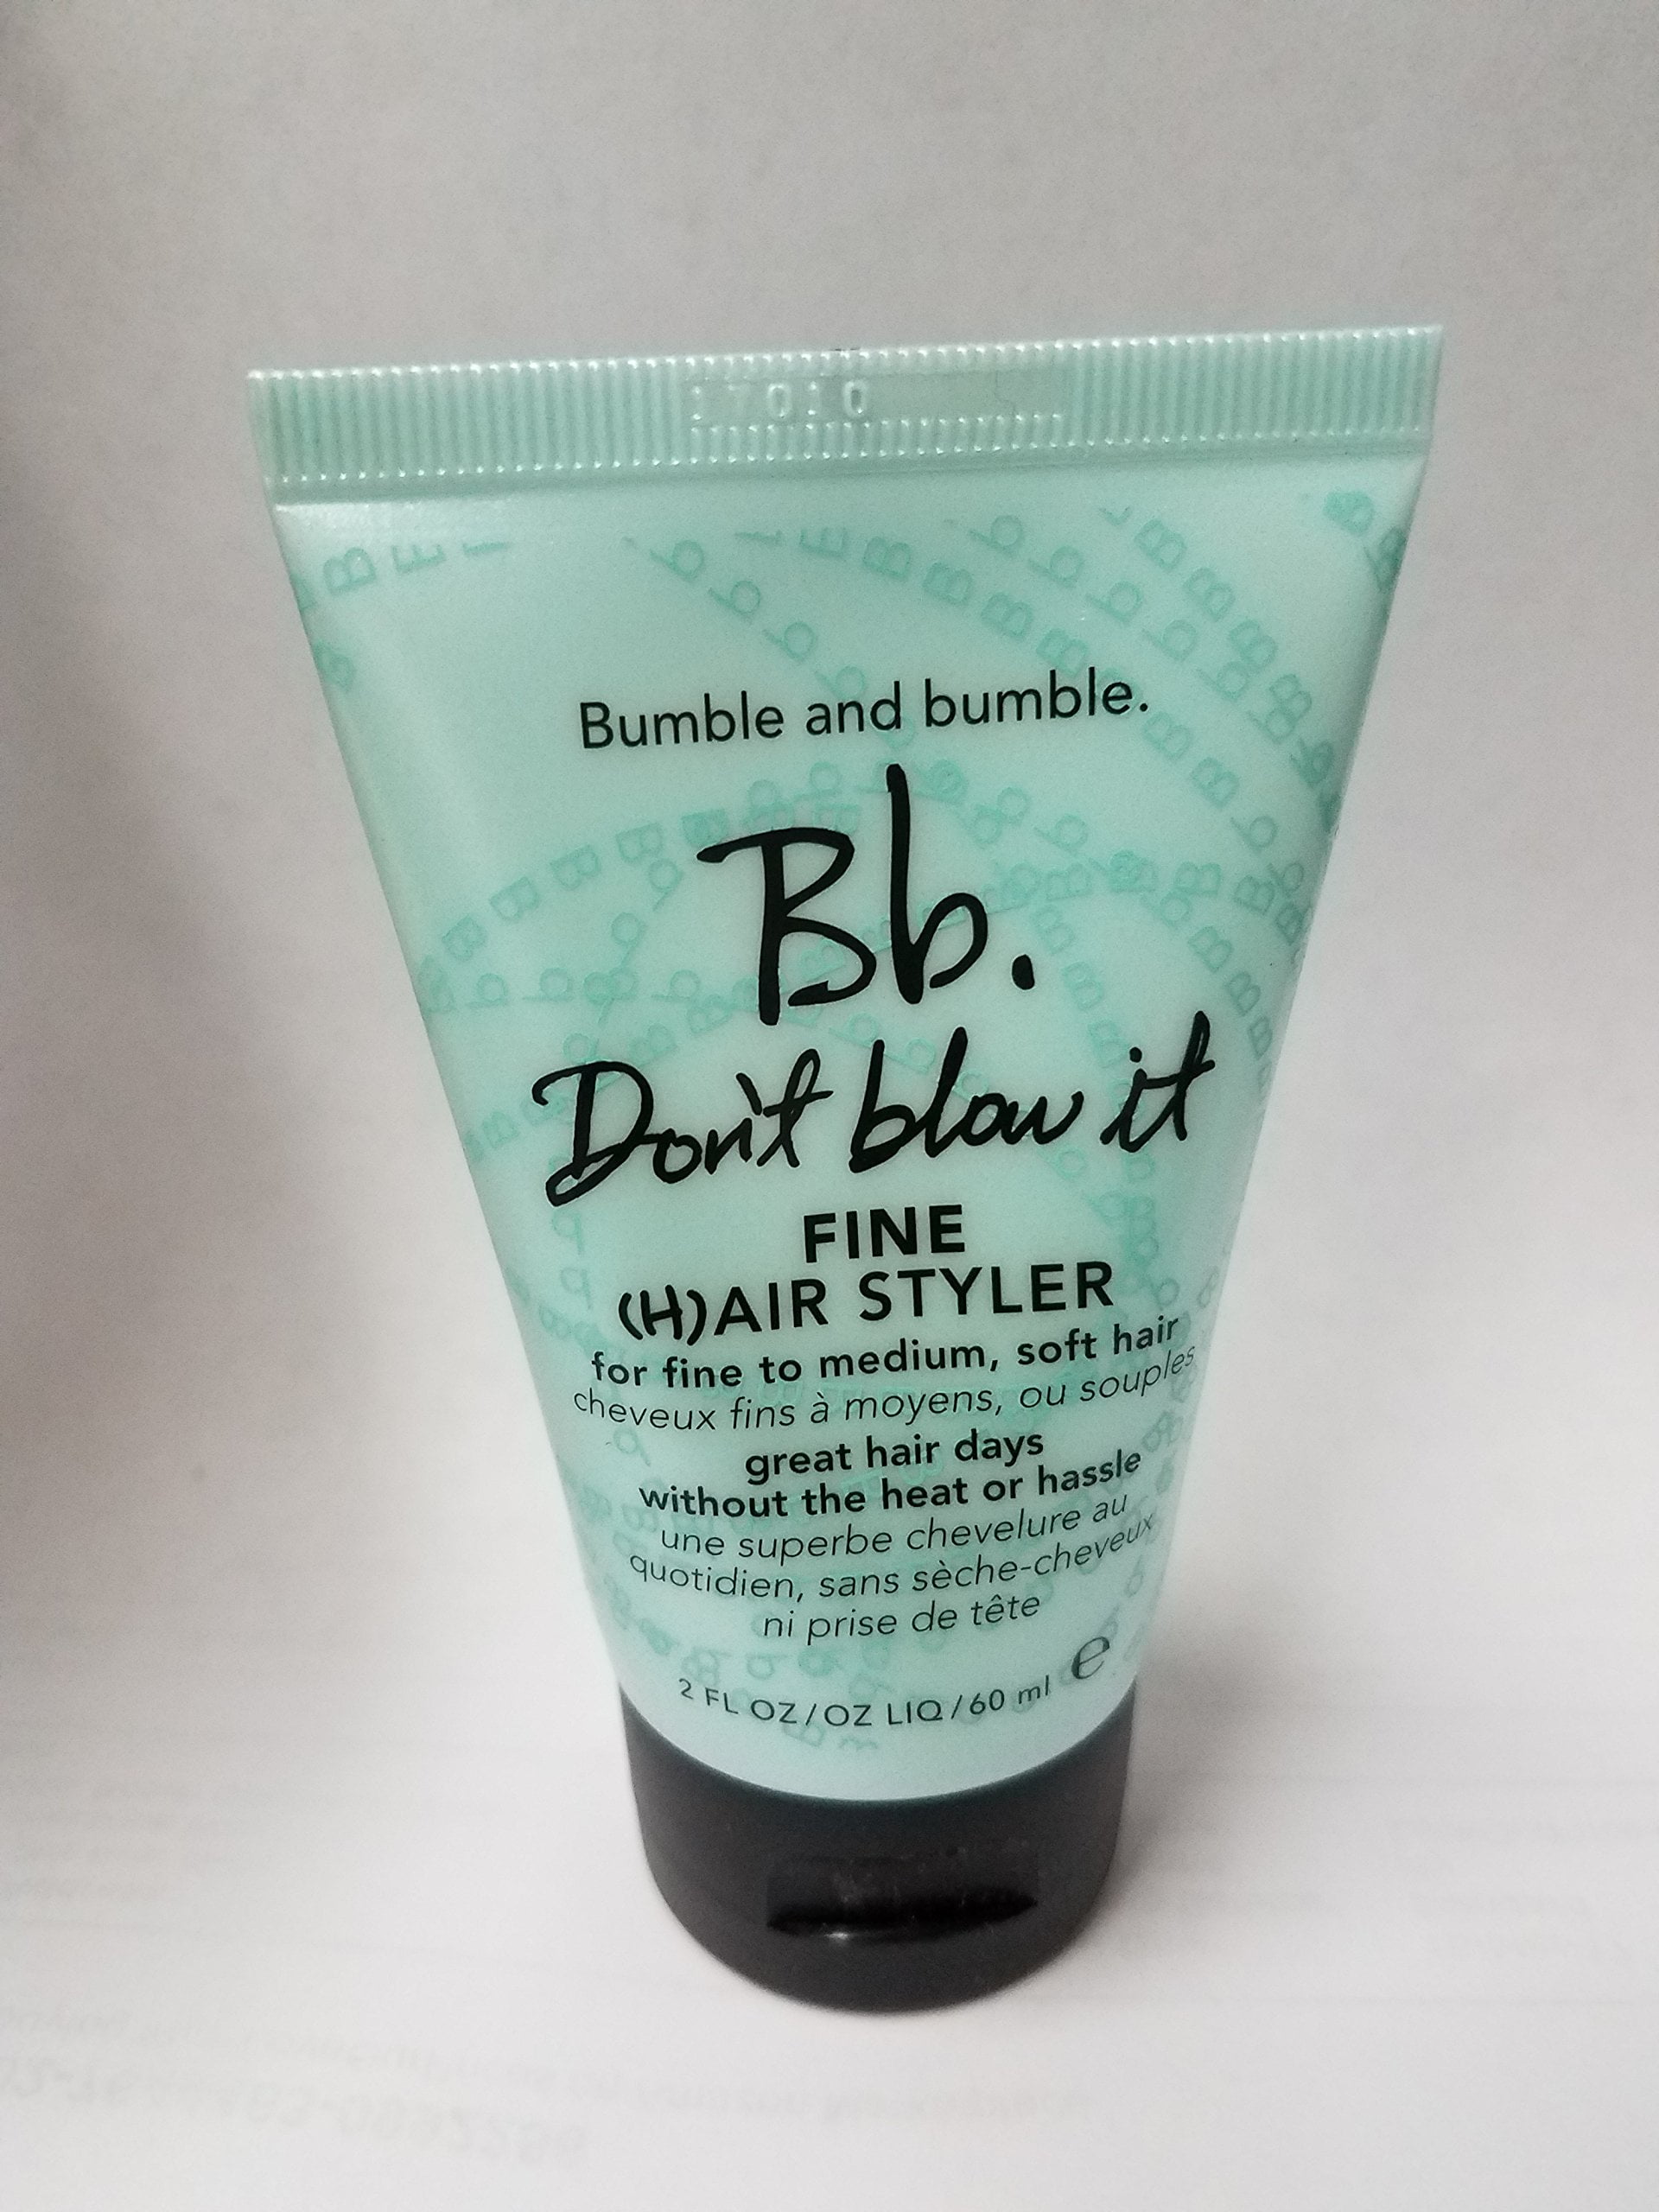 Don't Blow It Fine (H)air Styler - Bumble and bumble